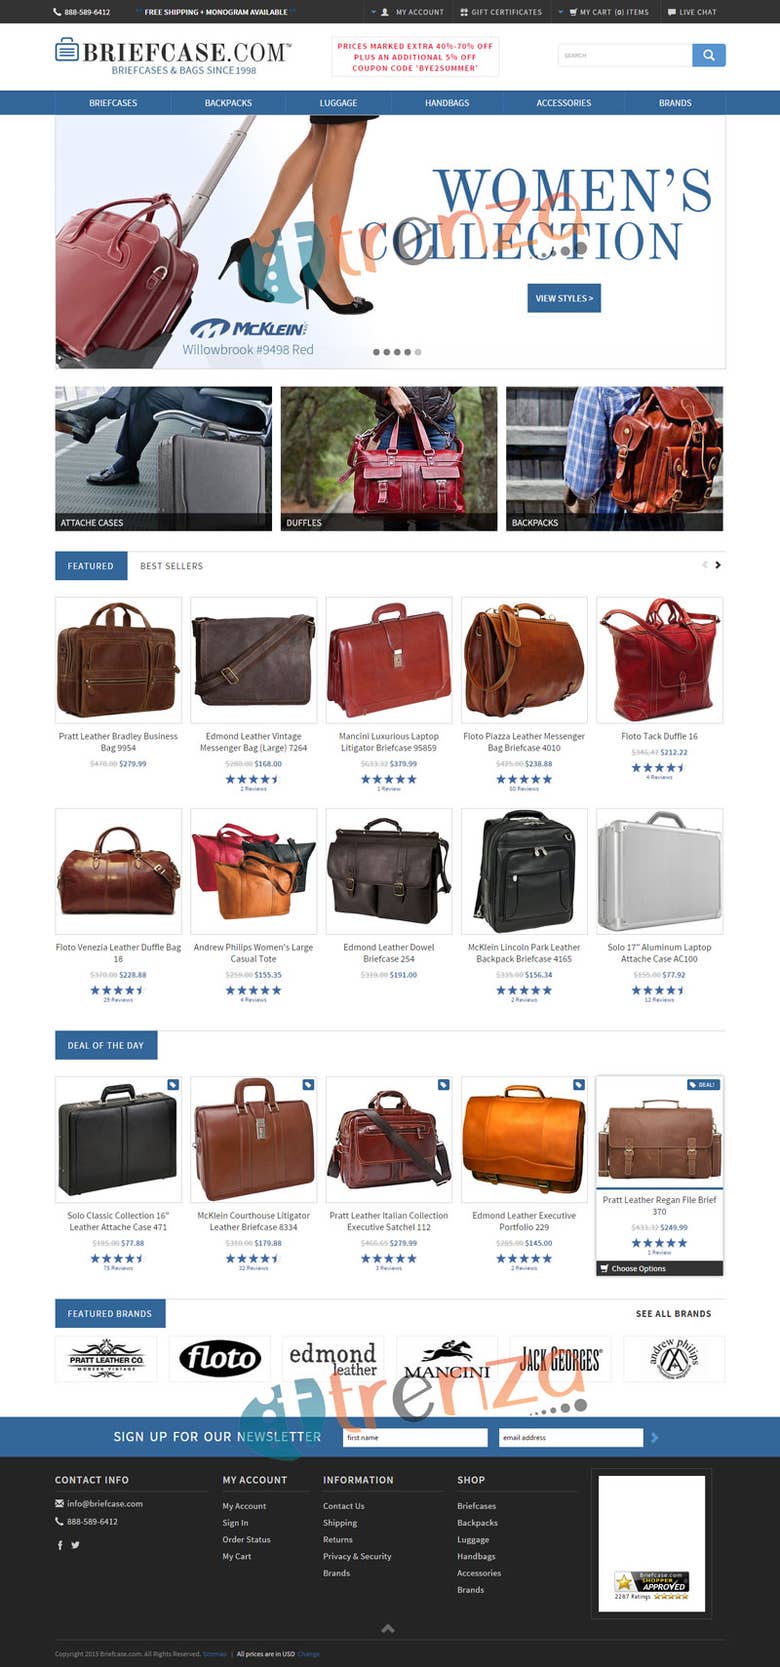 eCommerce Shop powered by BigCommerce | Briefcase.com